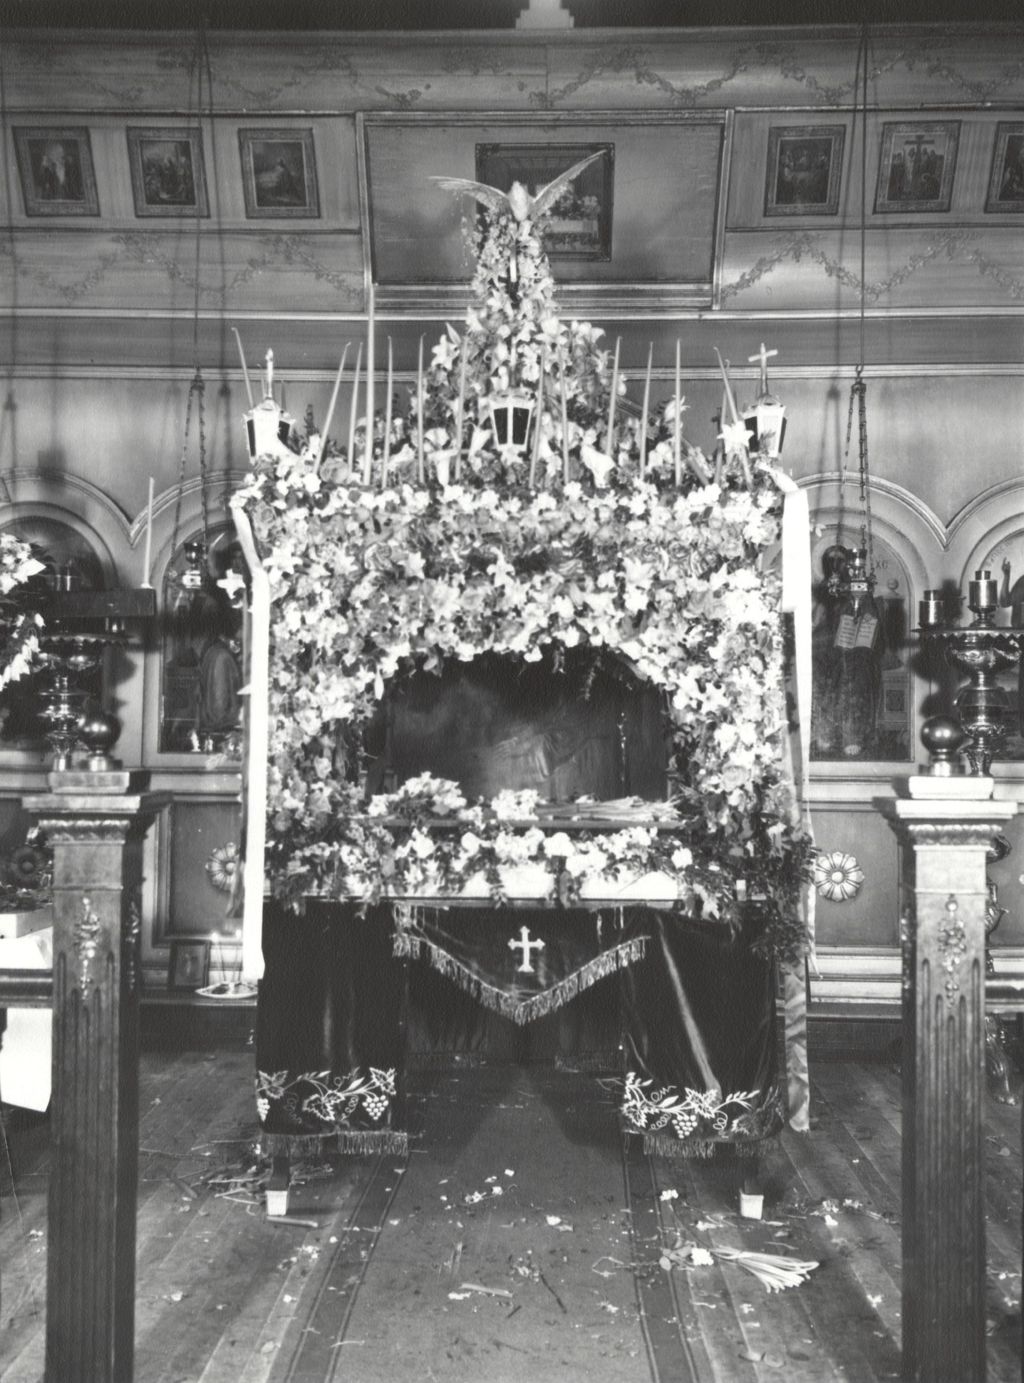 Miniature of Decorated structure for carrying icon (Epitaphios) at a Greek Orthodox Church for Easter services